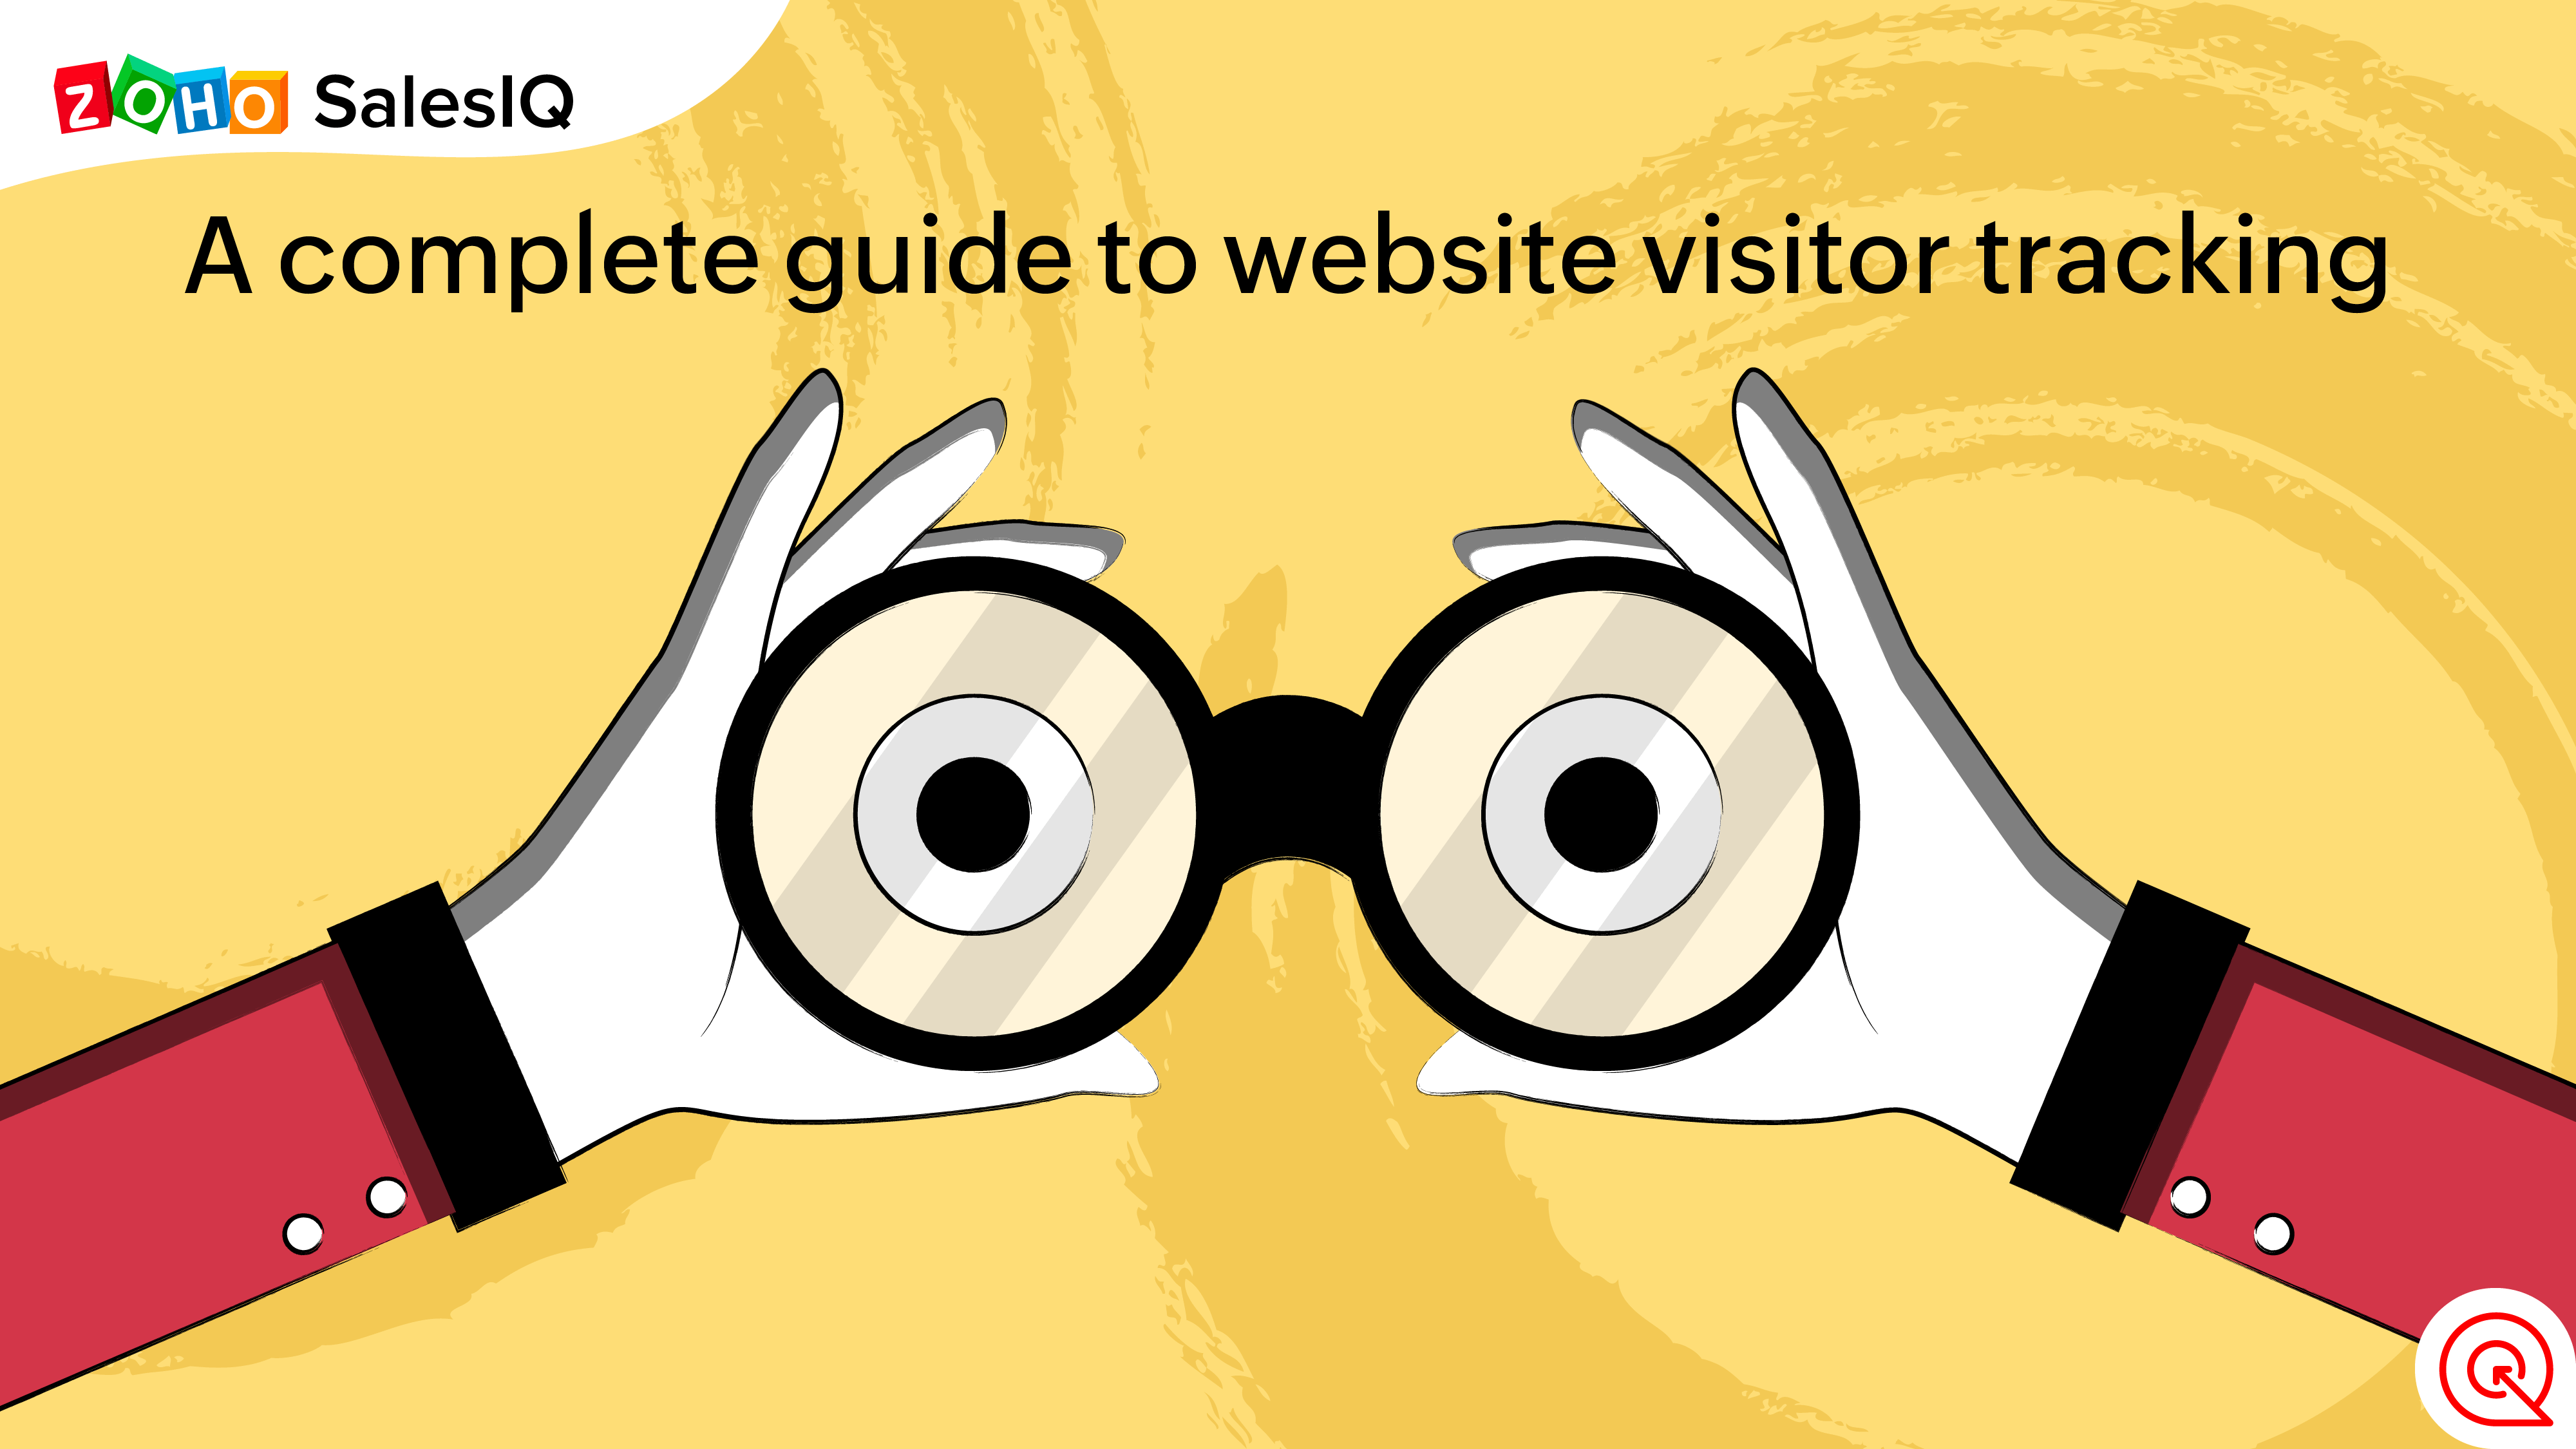 A complete guide to website visitor tracking